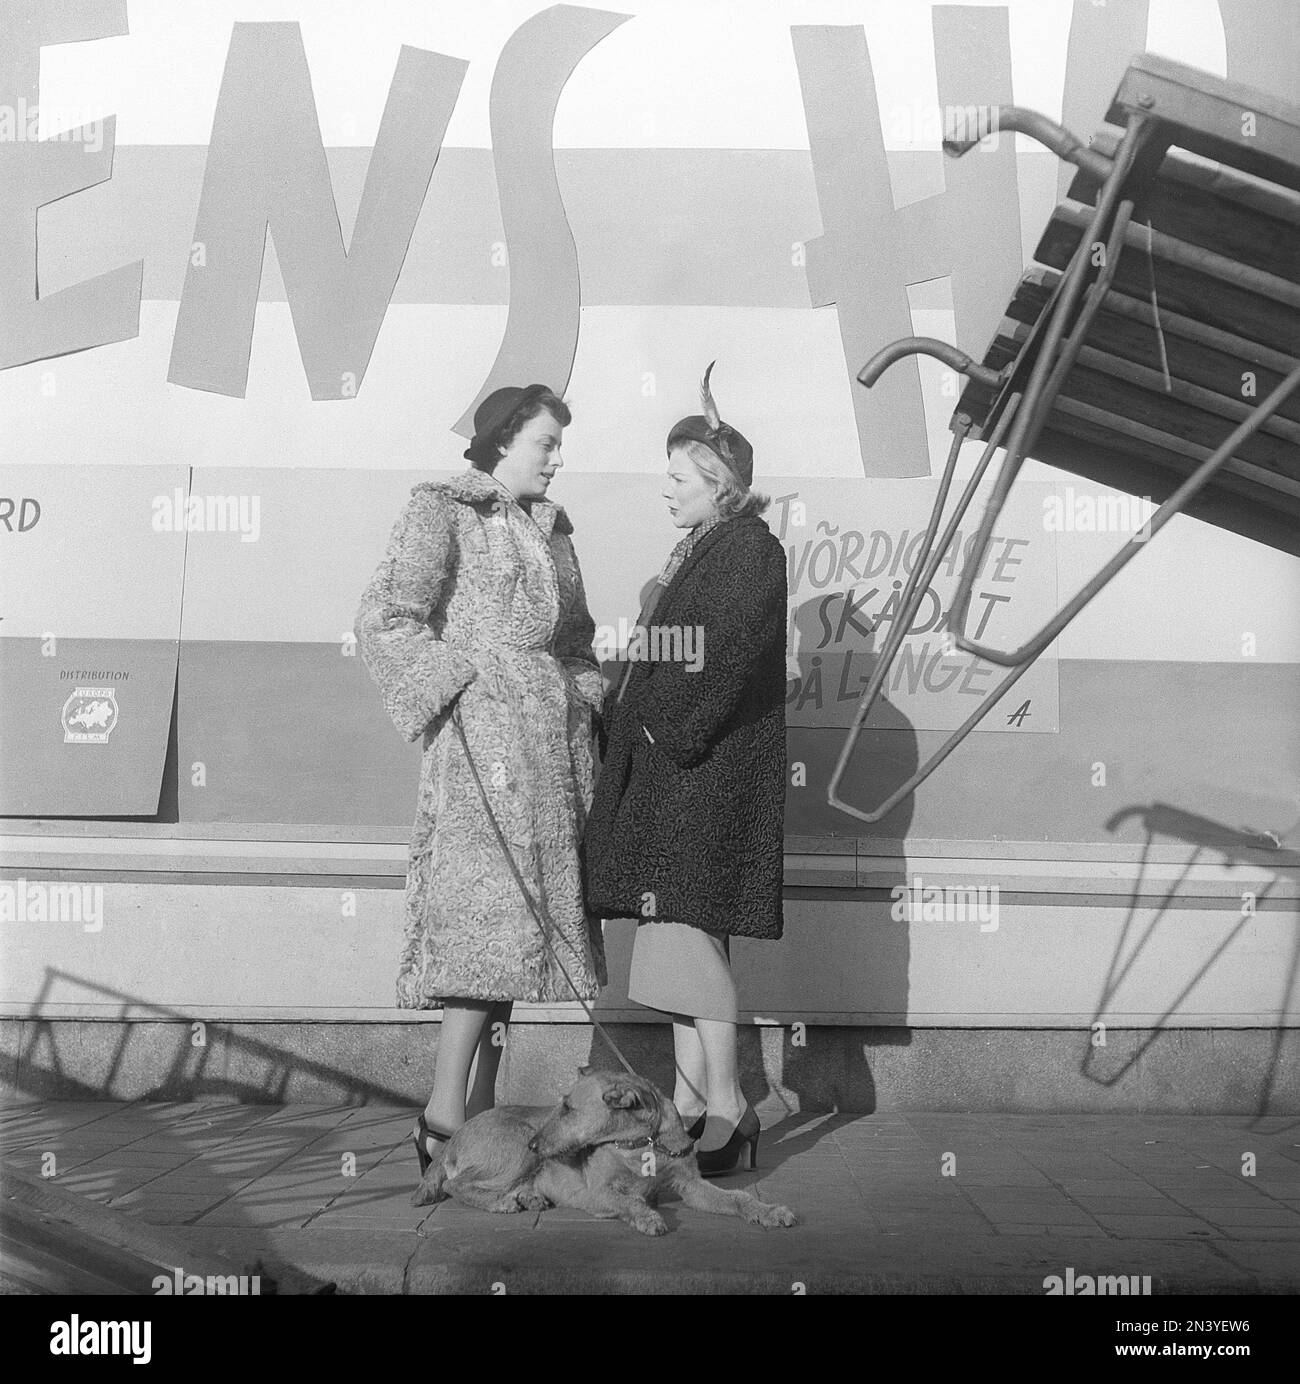 Women's fashion in the 1940s. Two women are standing close each other talking about something. They are wearing warm coats and matching hats. Sweden 1949 Kristoffersson ref AT37-11 Stock Photo